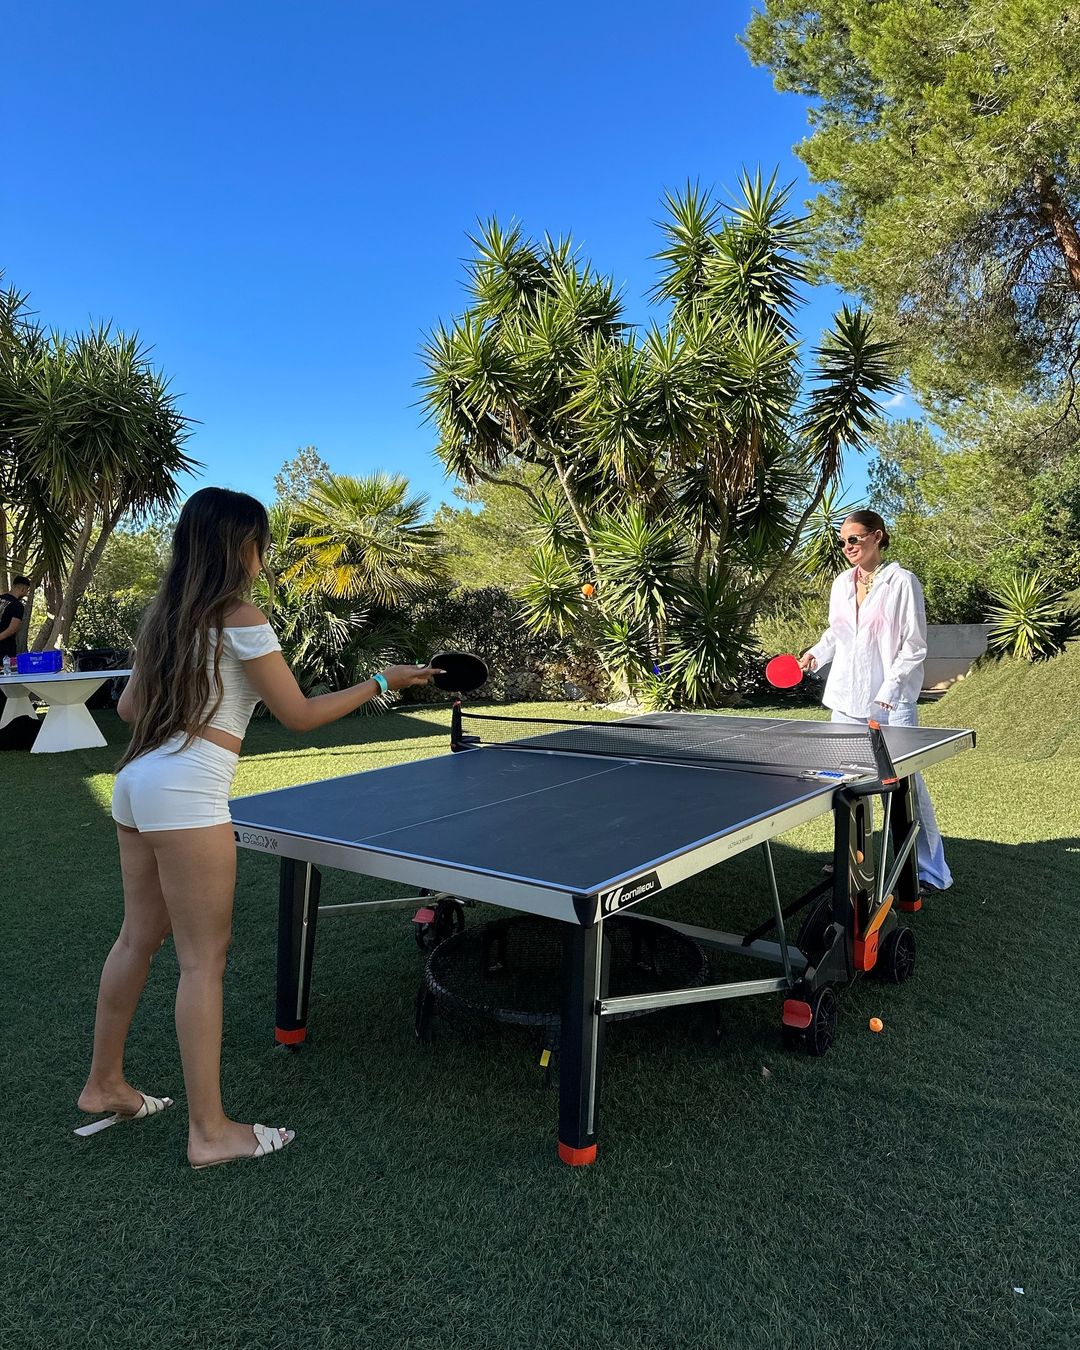 In this  post, she showed off her ping-pong table